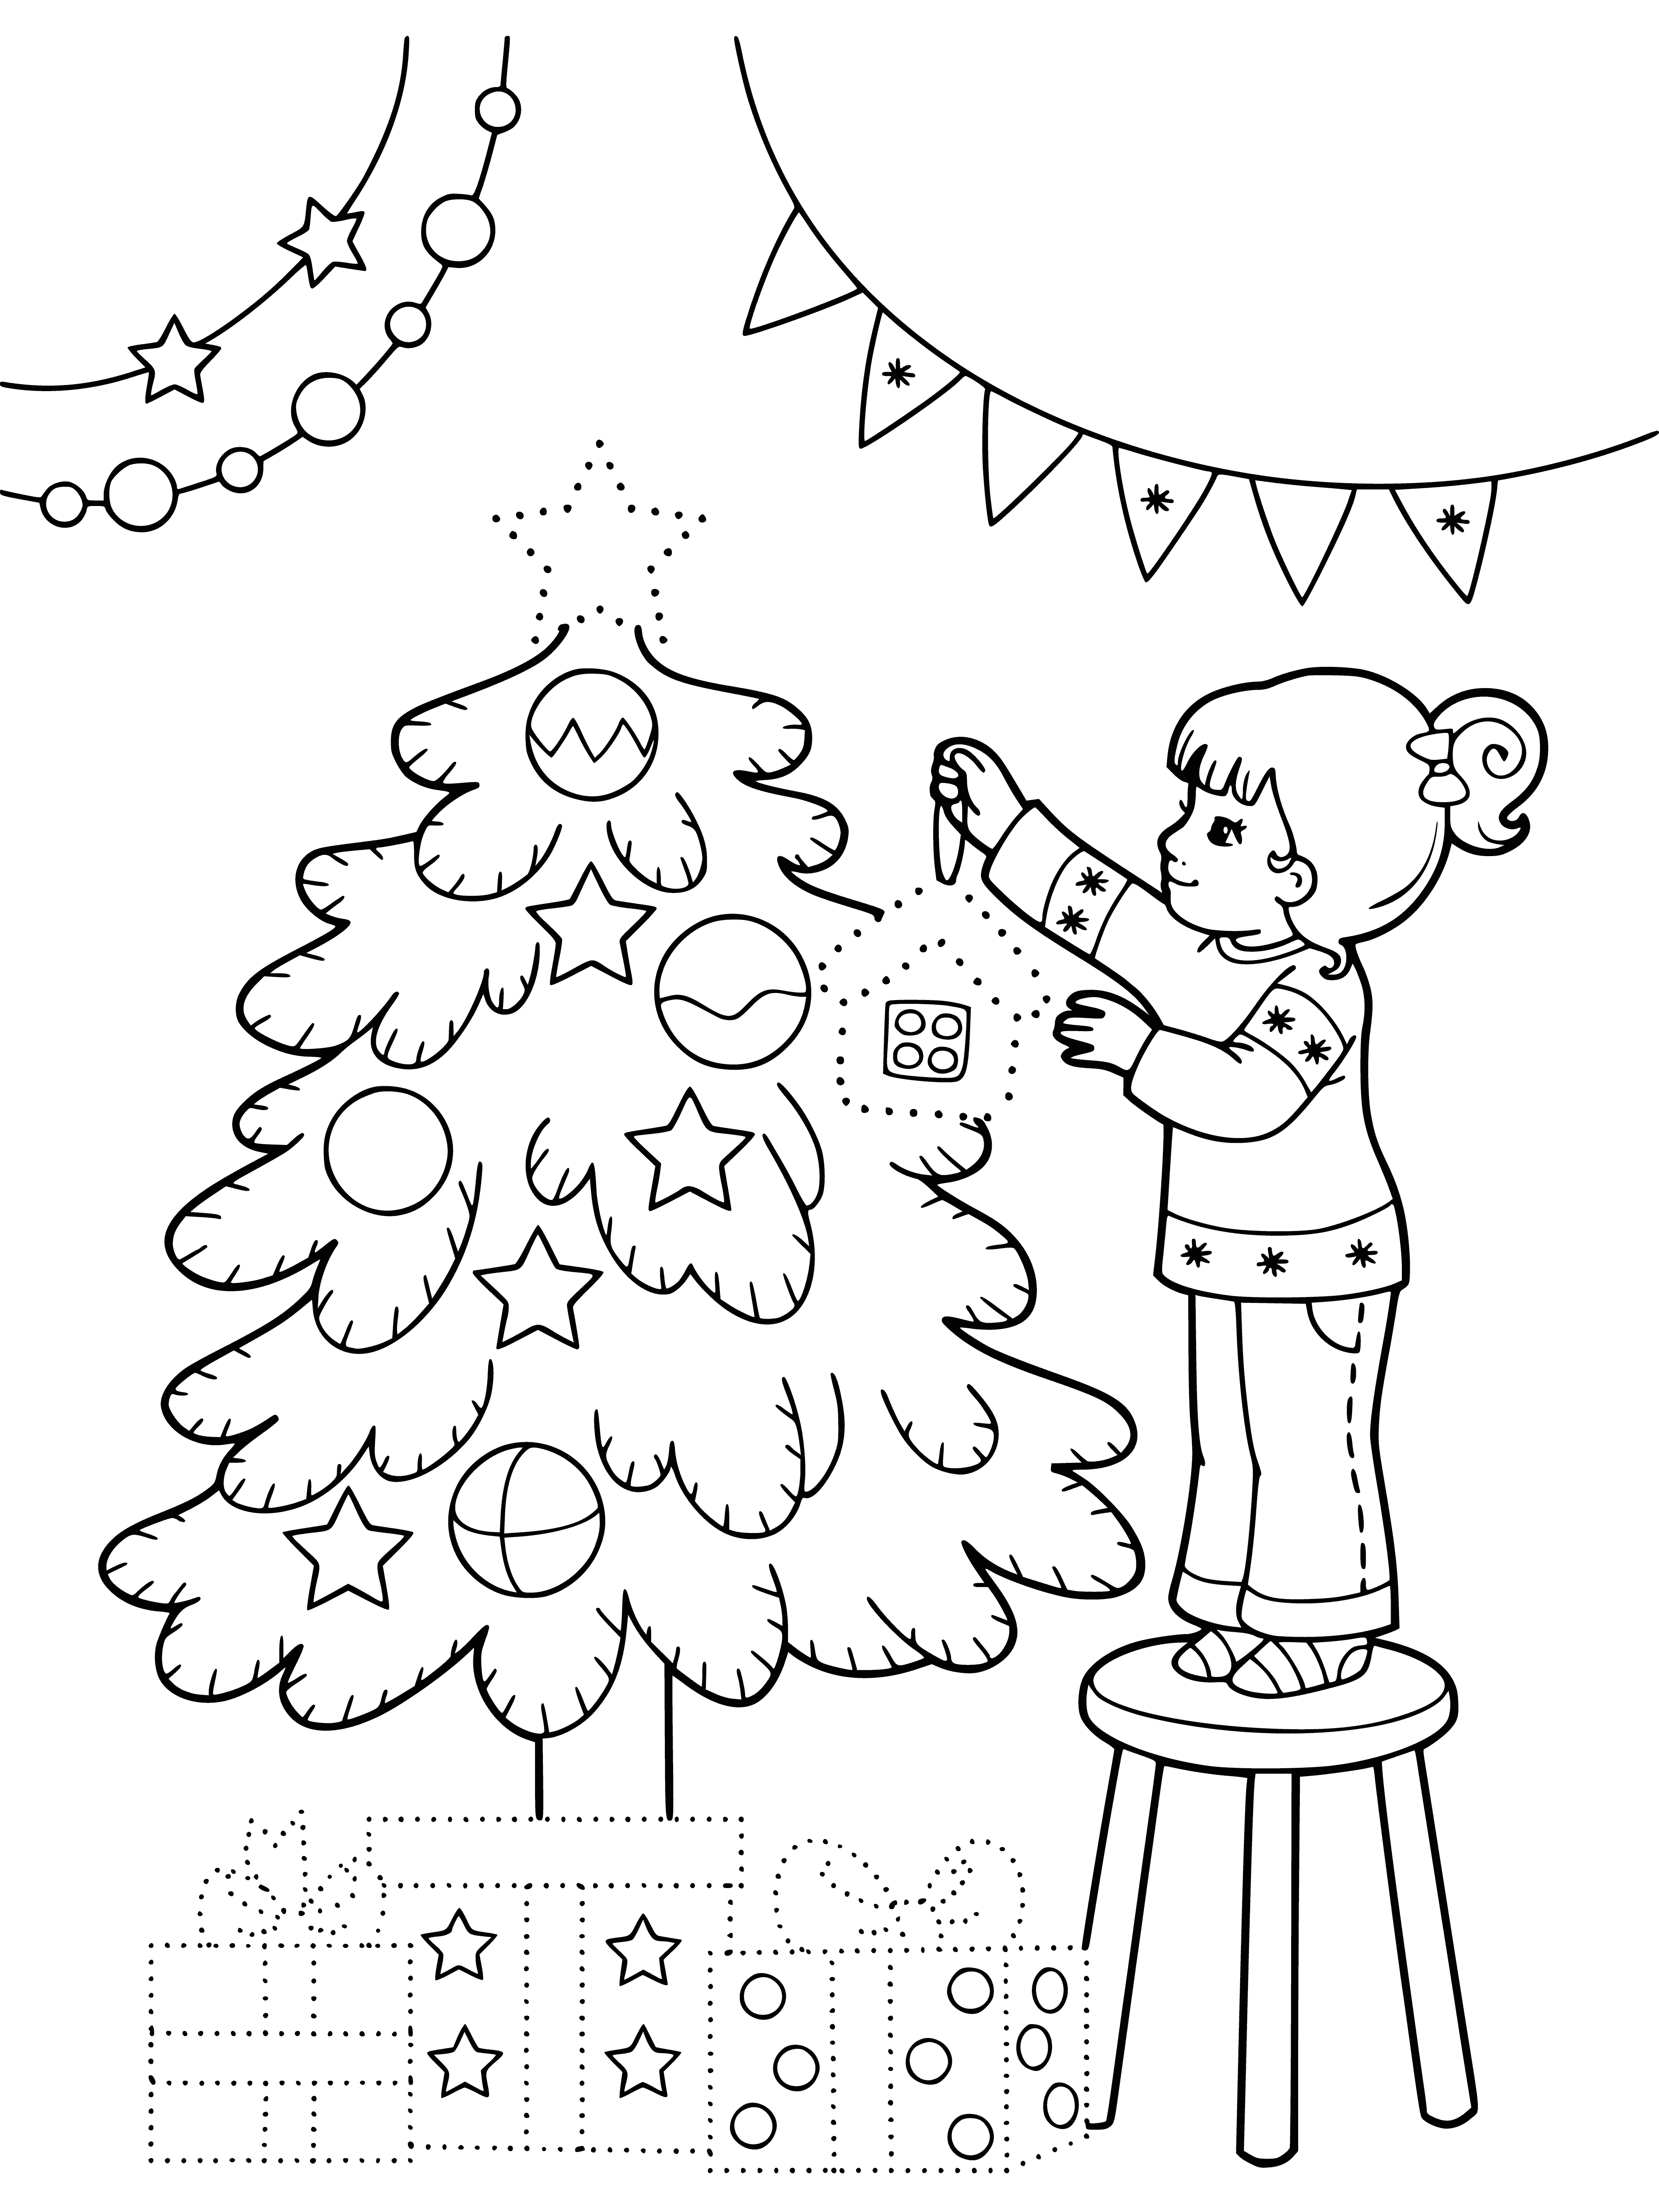 Girl decorating Xmas tree. Has string of lights and star for top. Already some decorations on tree.